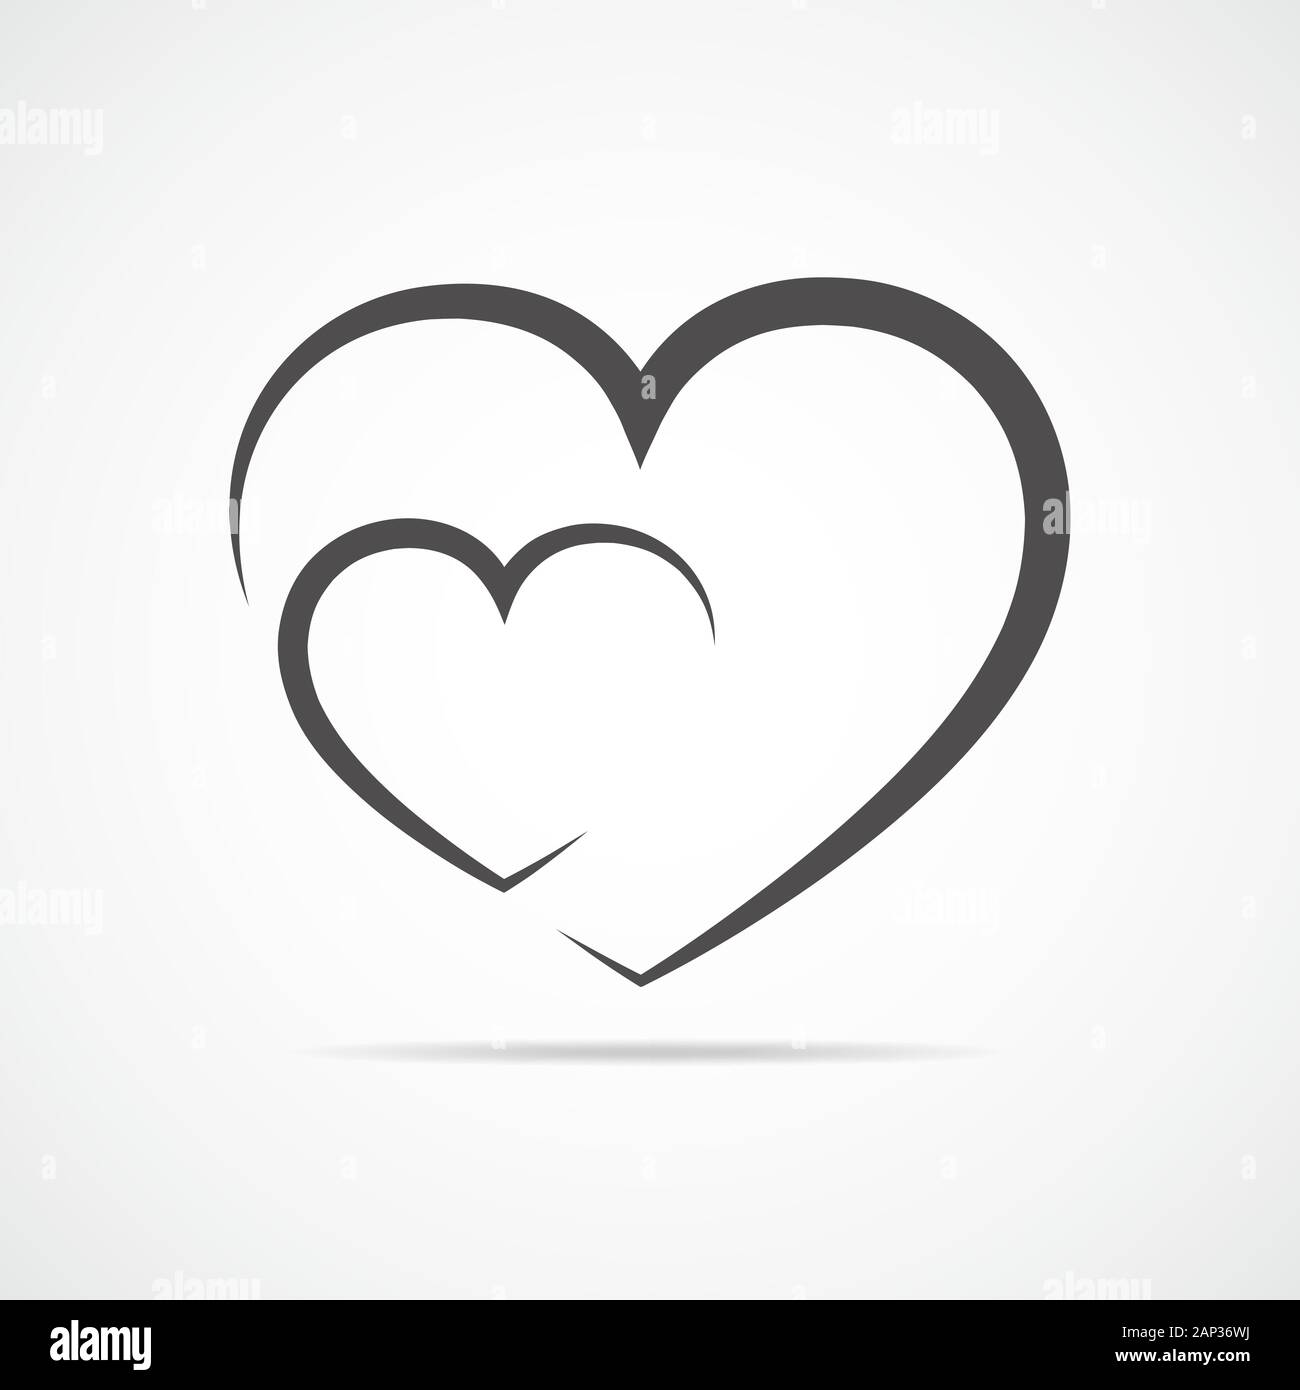 Black at heart Stock Vector Images - Alamy